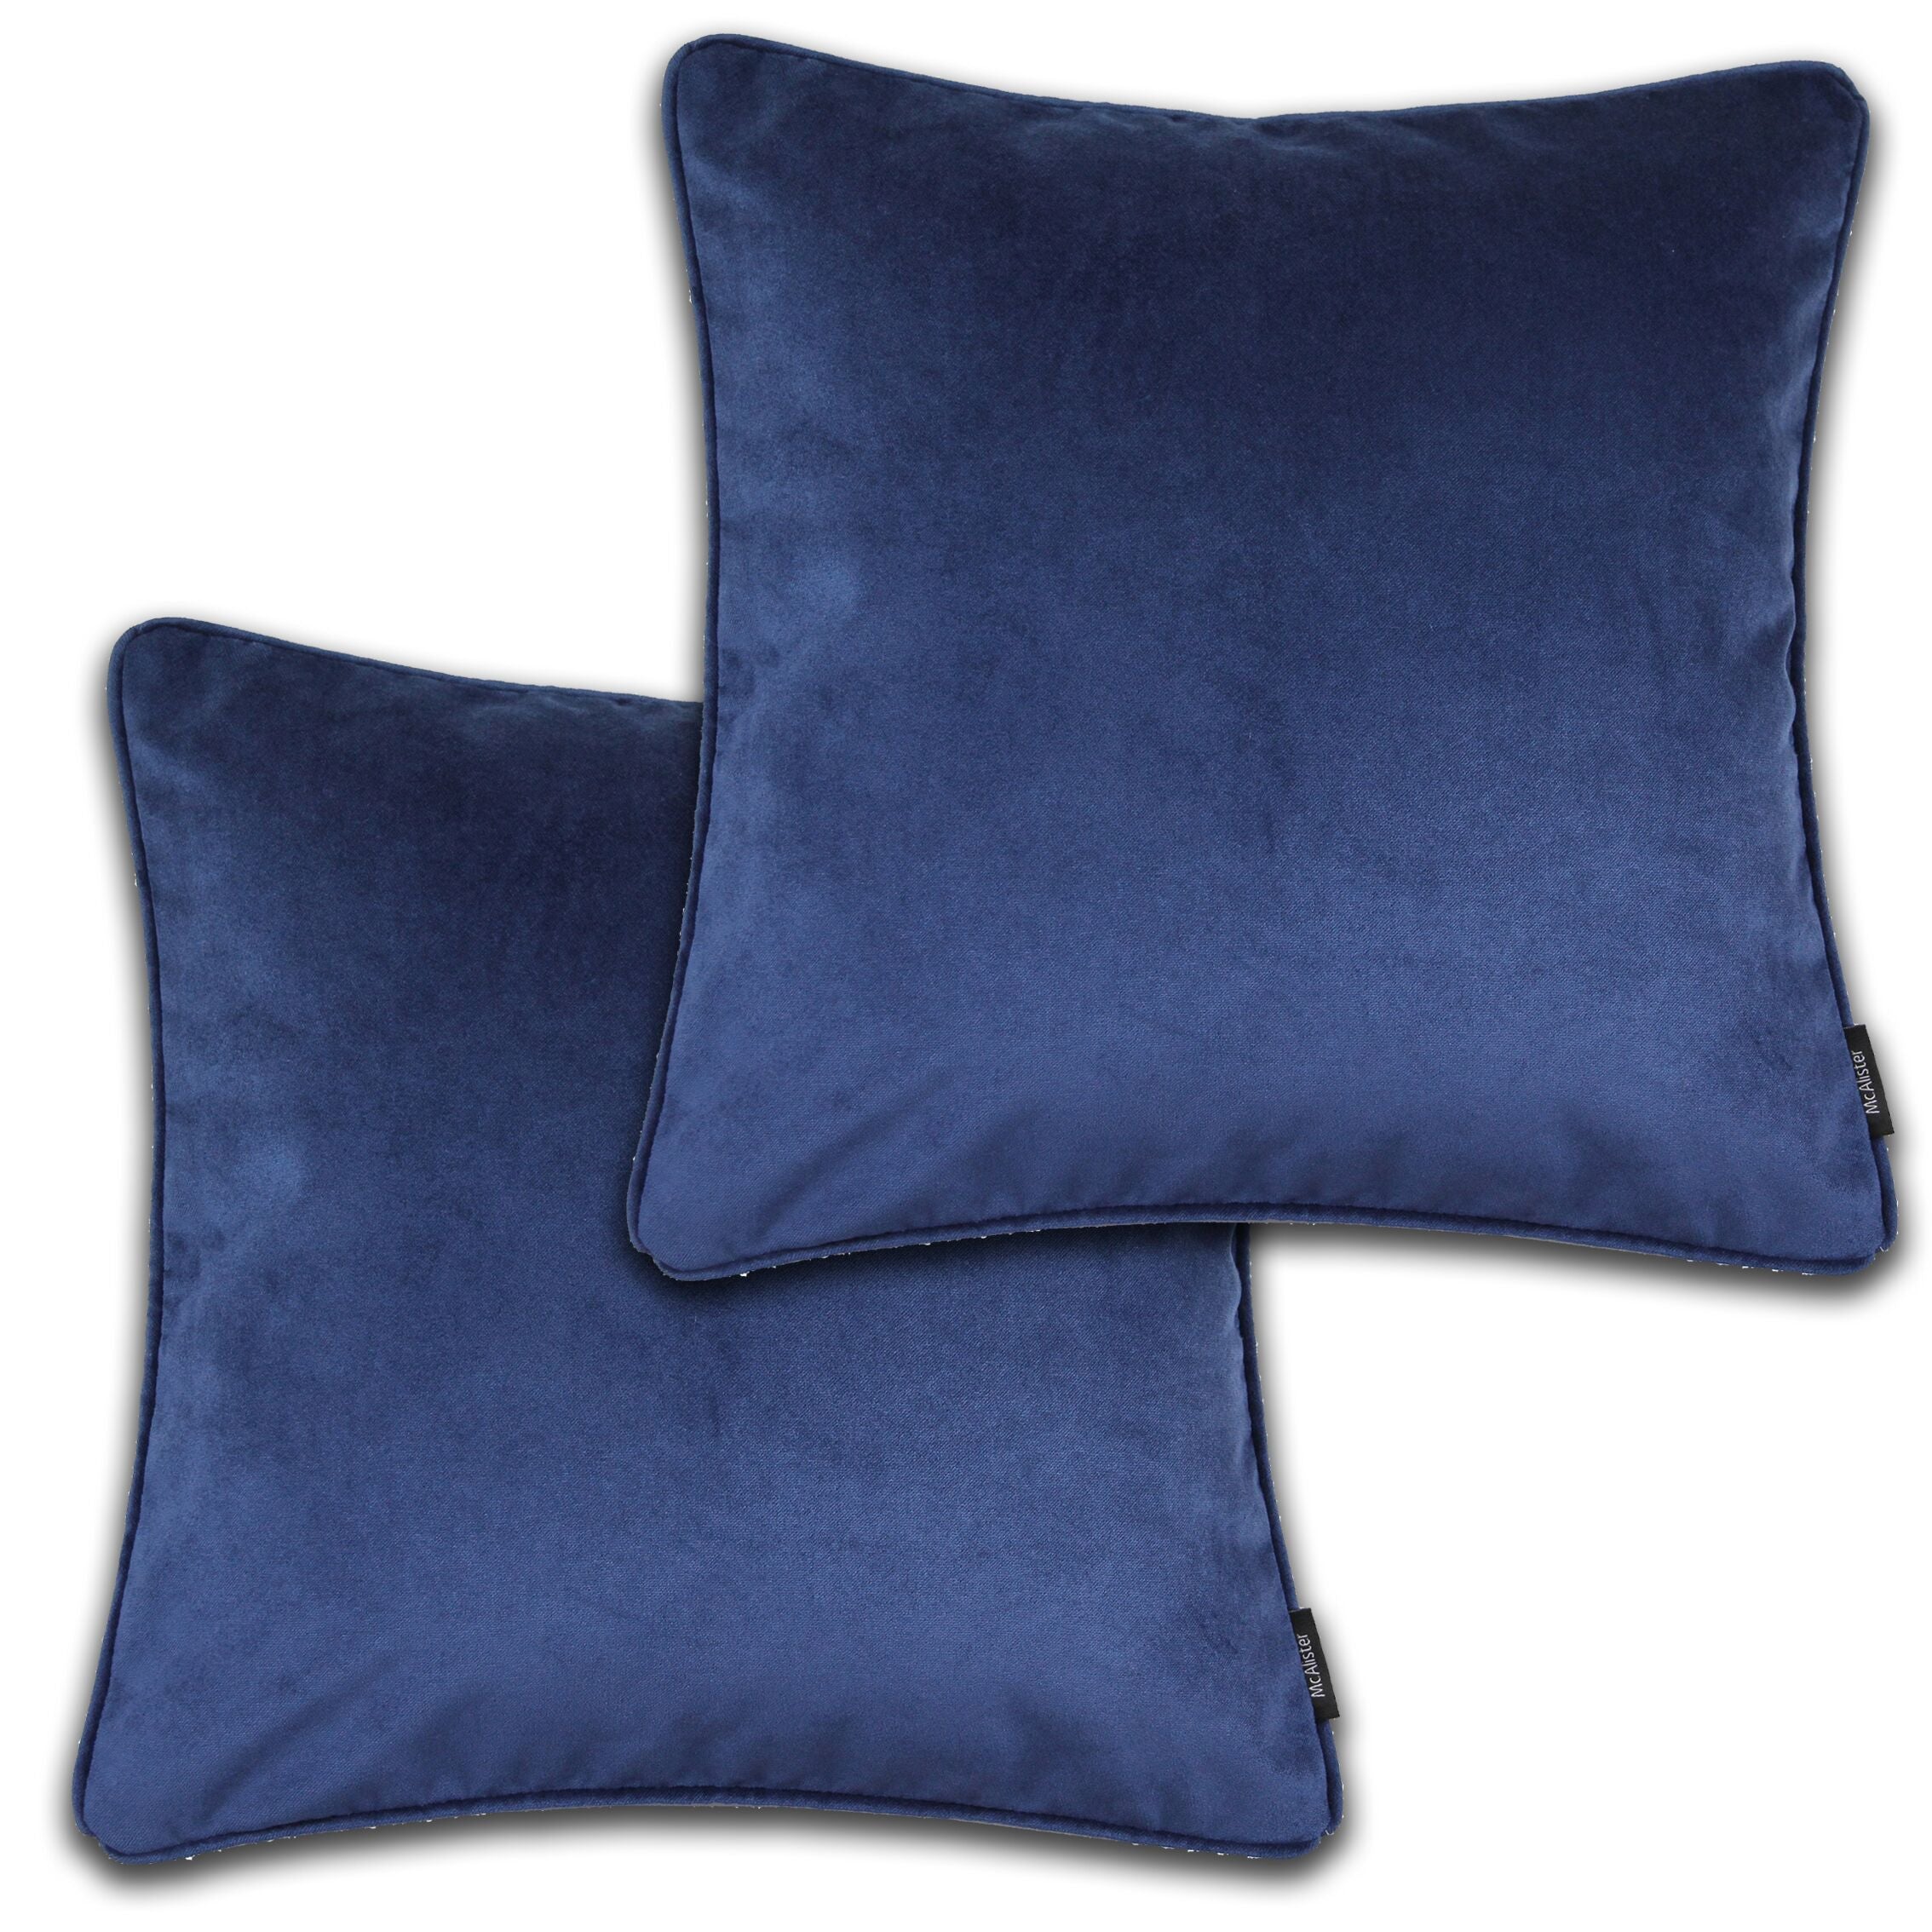 McAlister Textiles Matt Navy Blue Velvet 43cm x 43cm Piped Cushion Sets Cushions and Covers Cushion Covers Set of 2 